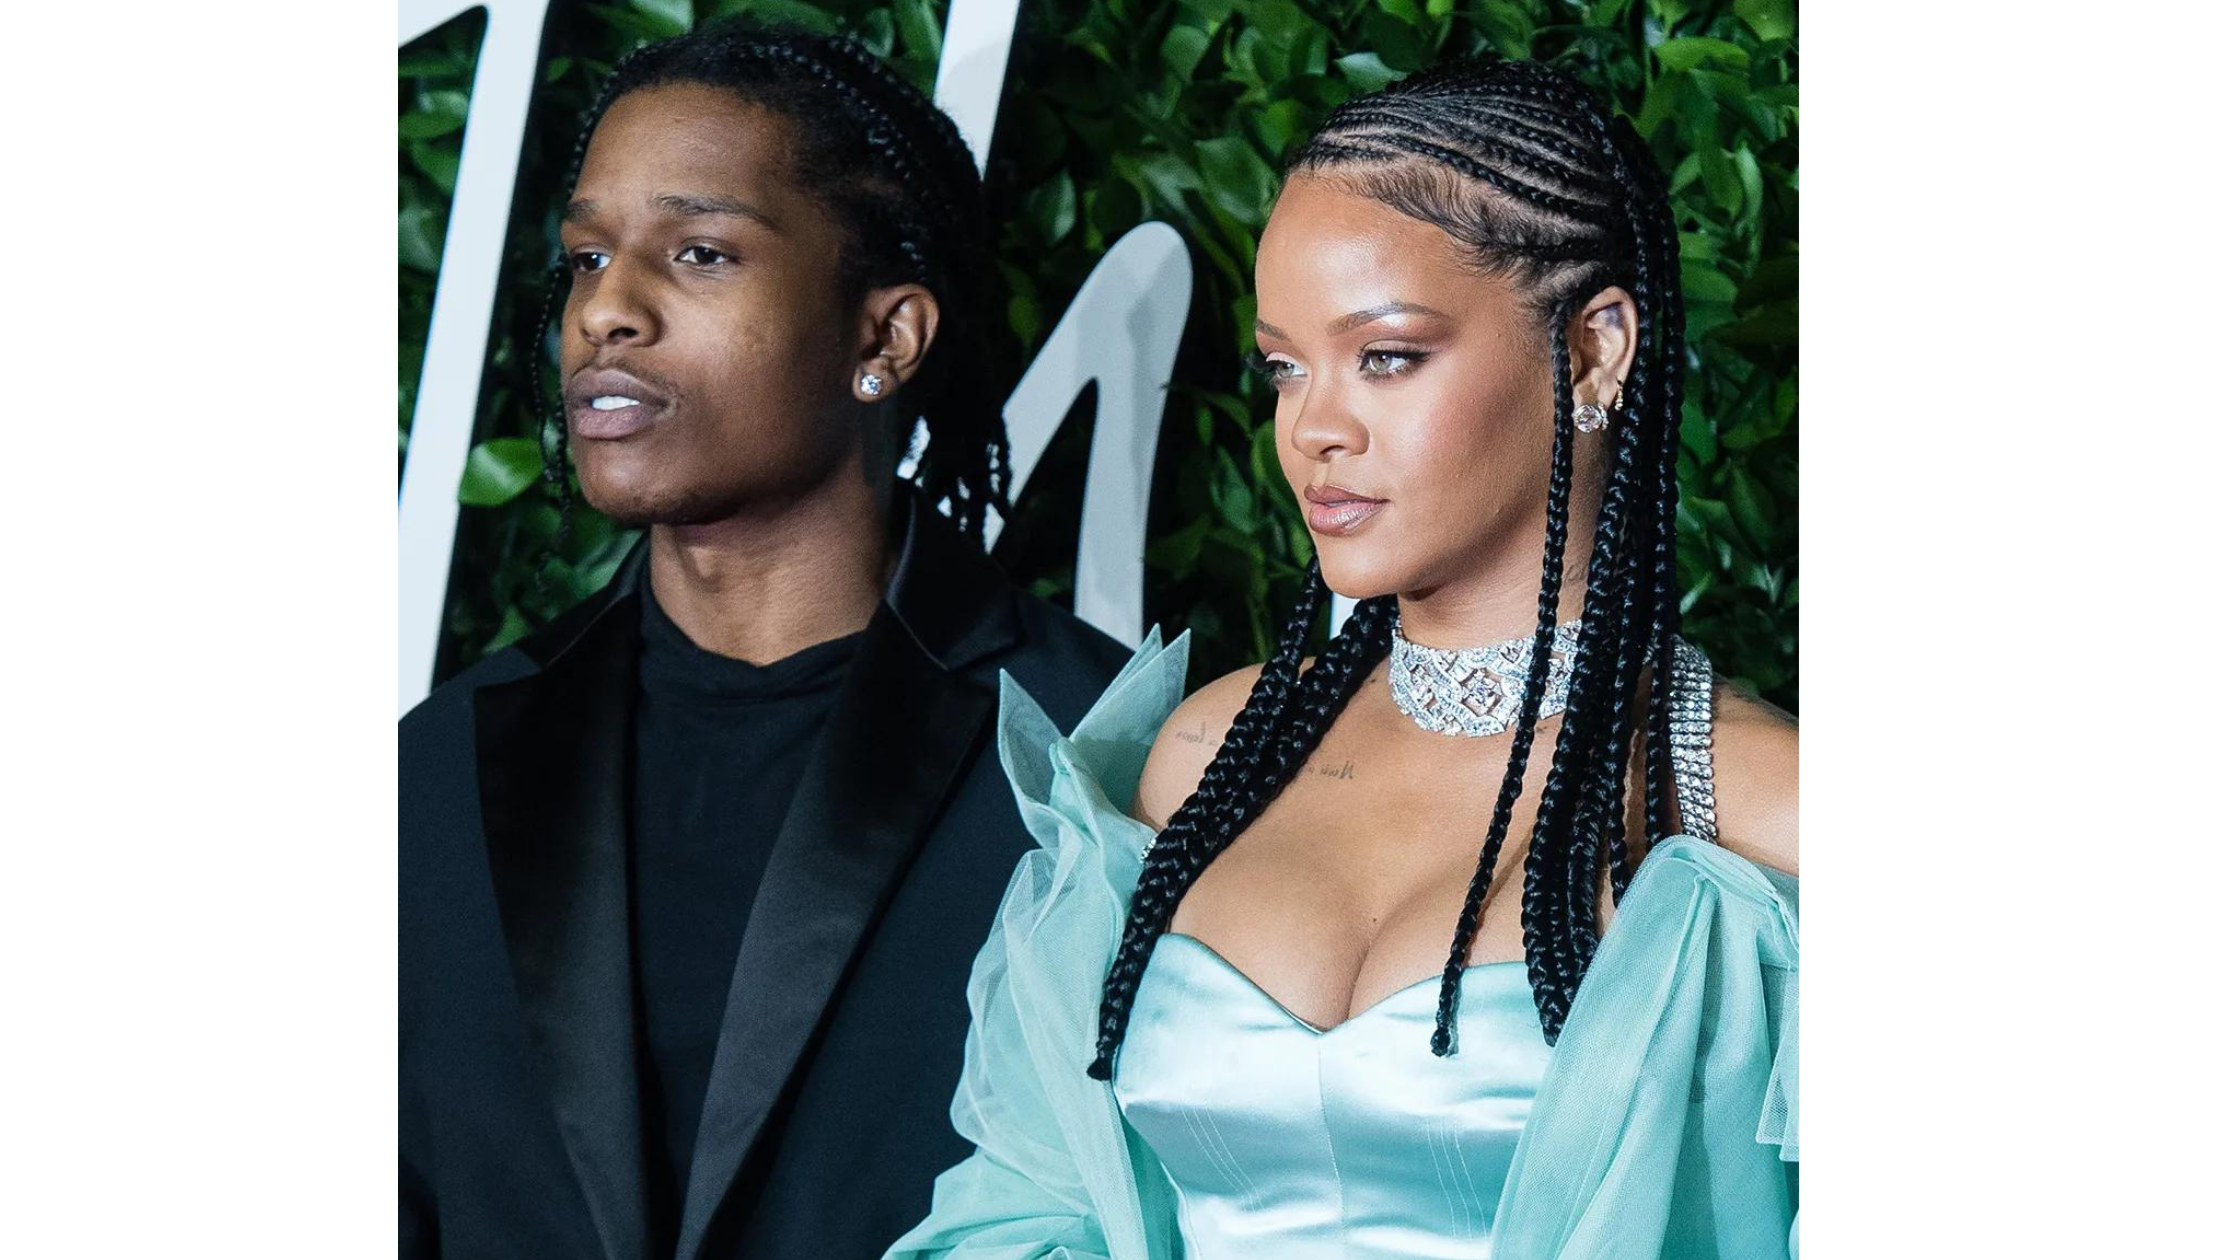 Is it real?  Rihanna and A$AP Rocky Are Married in New Music Video!  